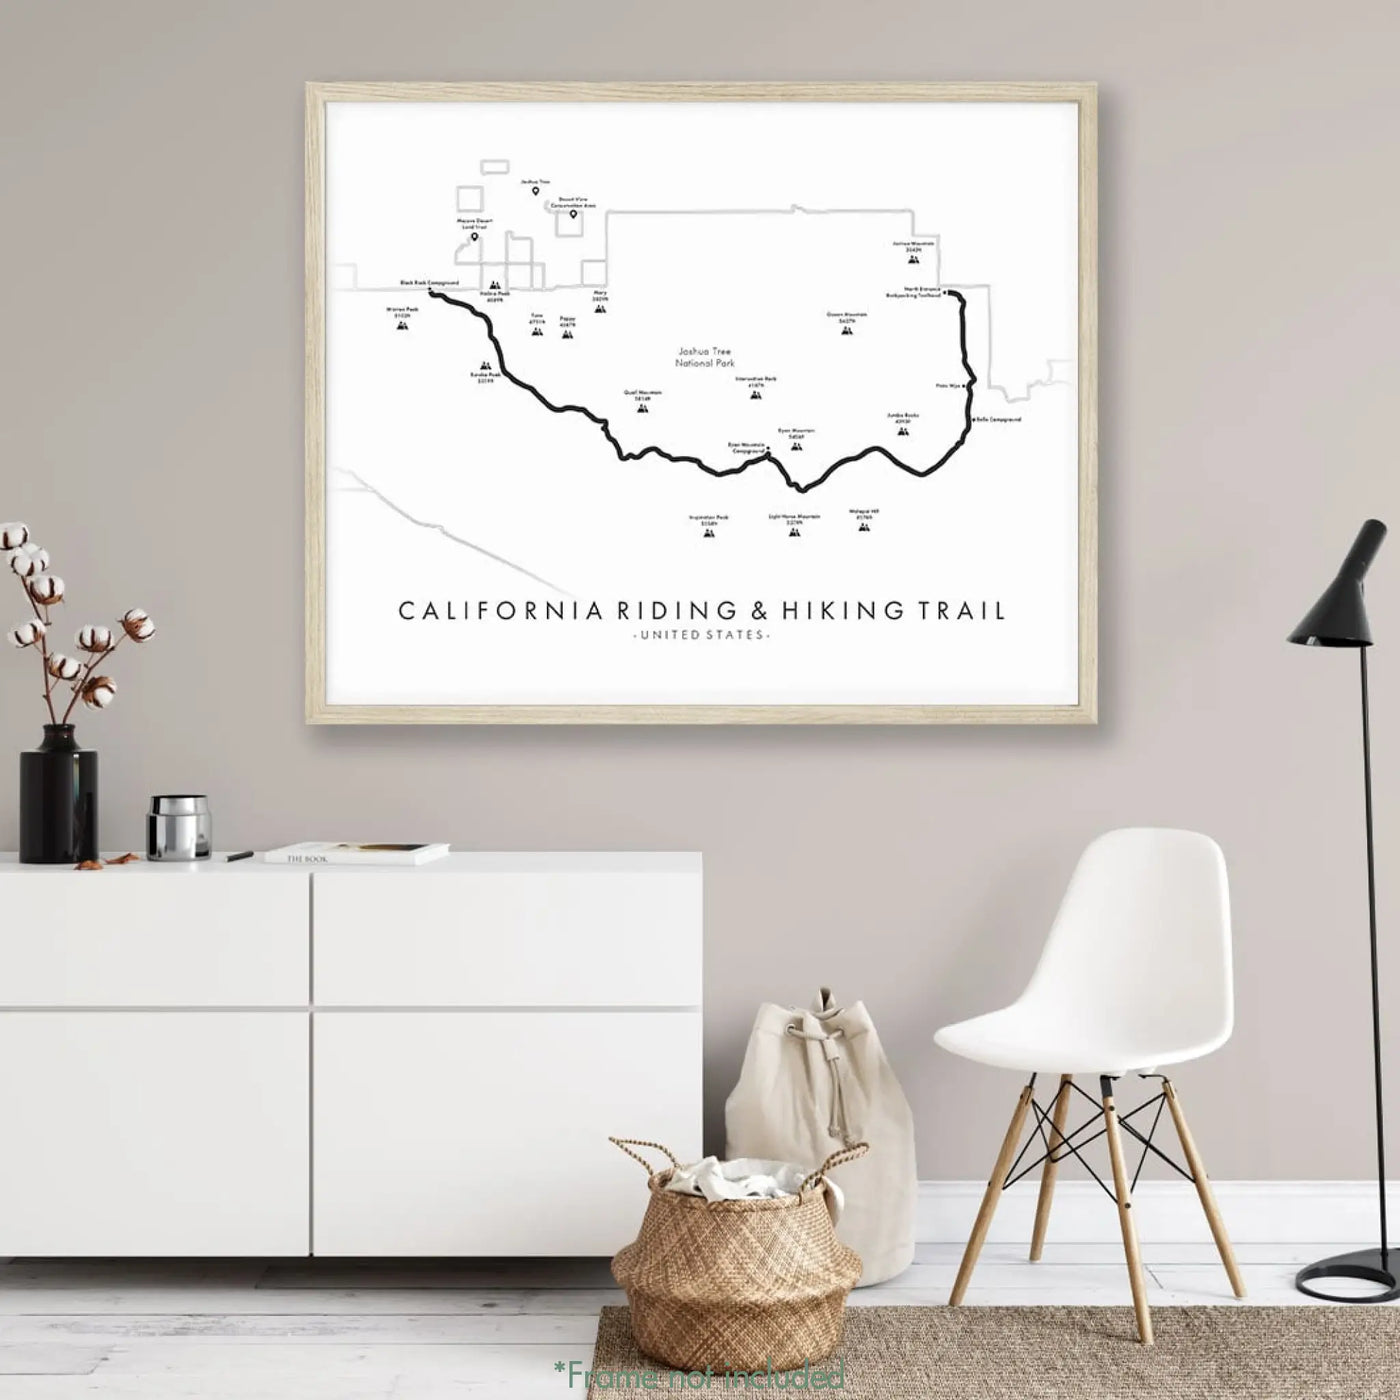 Trail Poster of California Riding & Hiking Trail - White Mockup